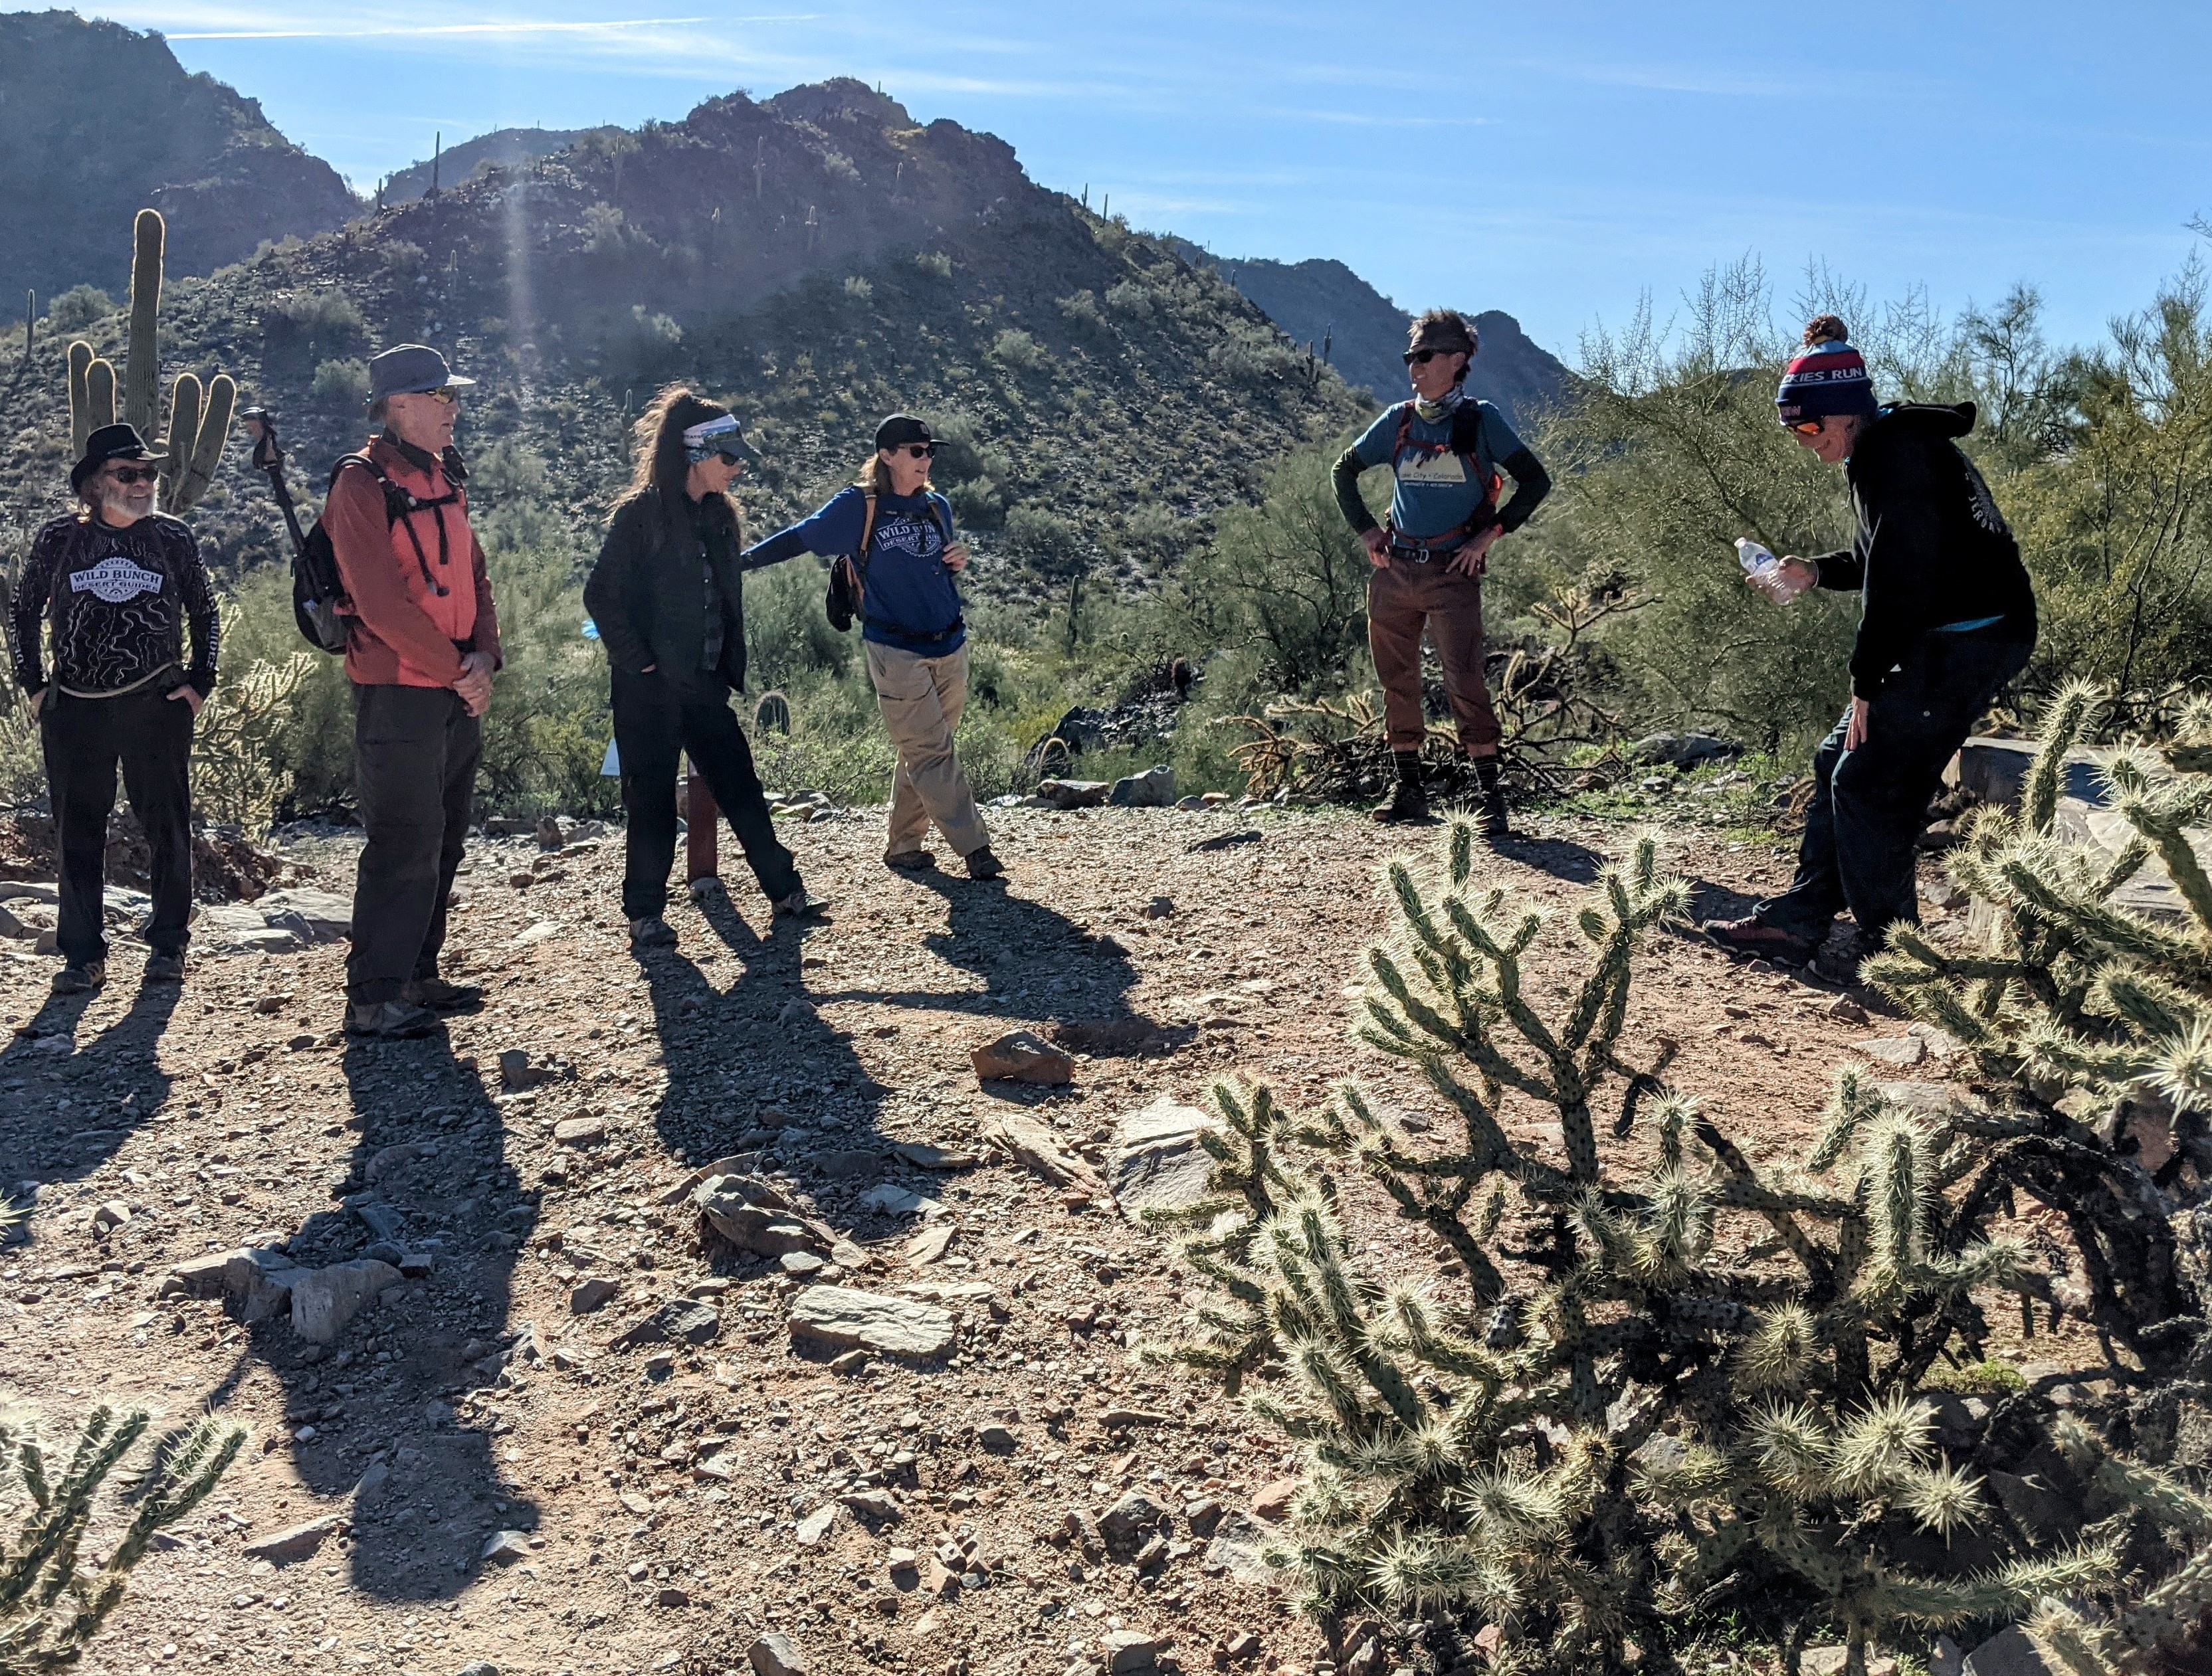 Surrounded by cactus and a mountainous backdrop, Henry's hiking group takes a break in the sun on one of the Wild Bunch's Phoenix hiking tours.